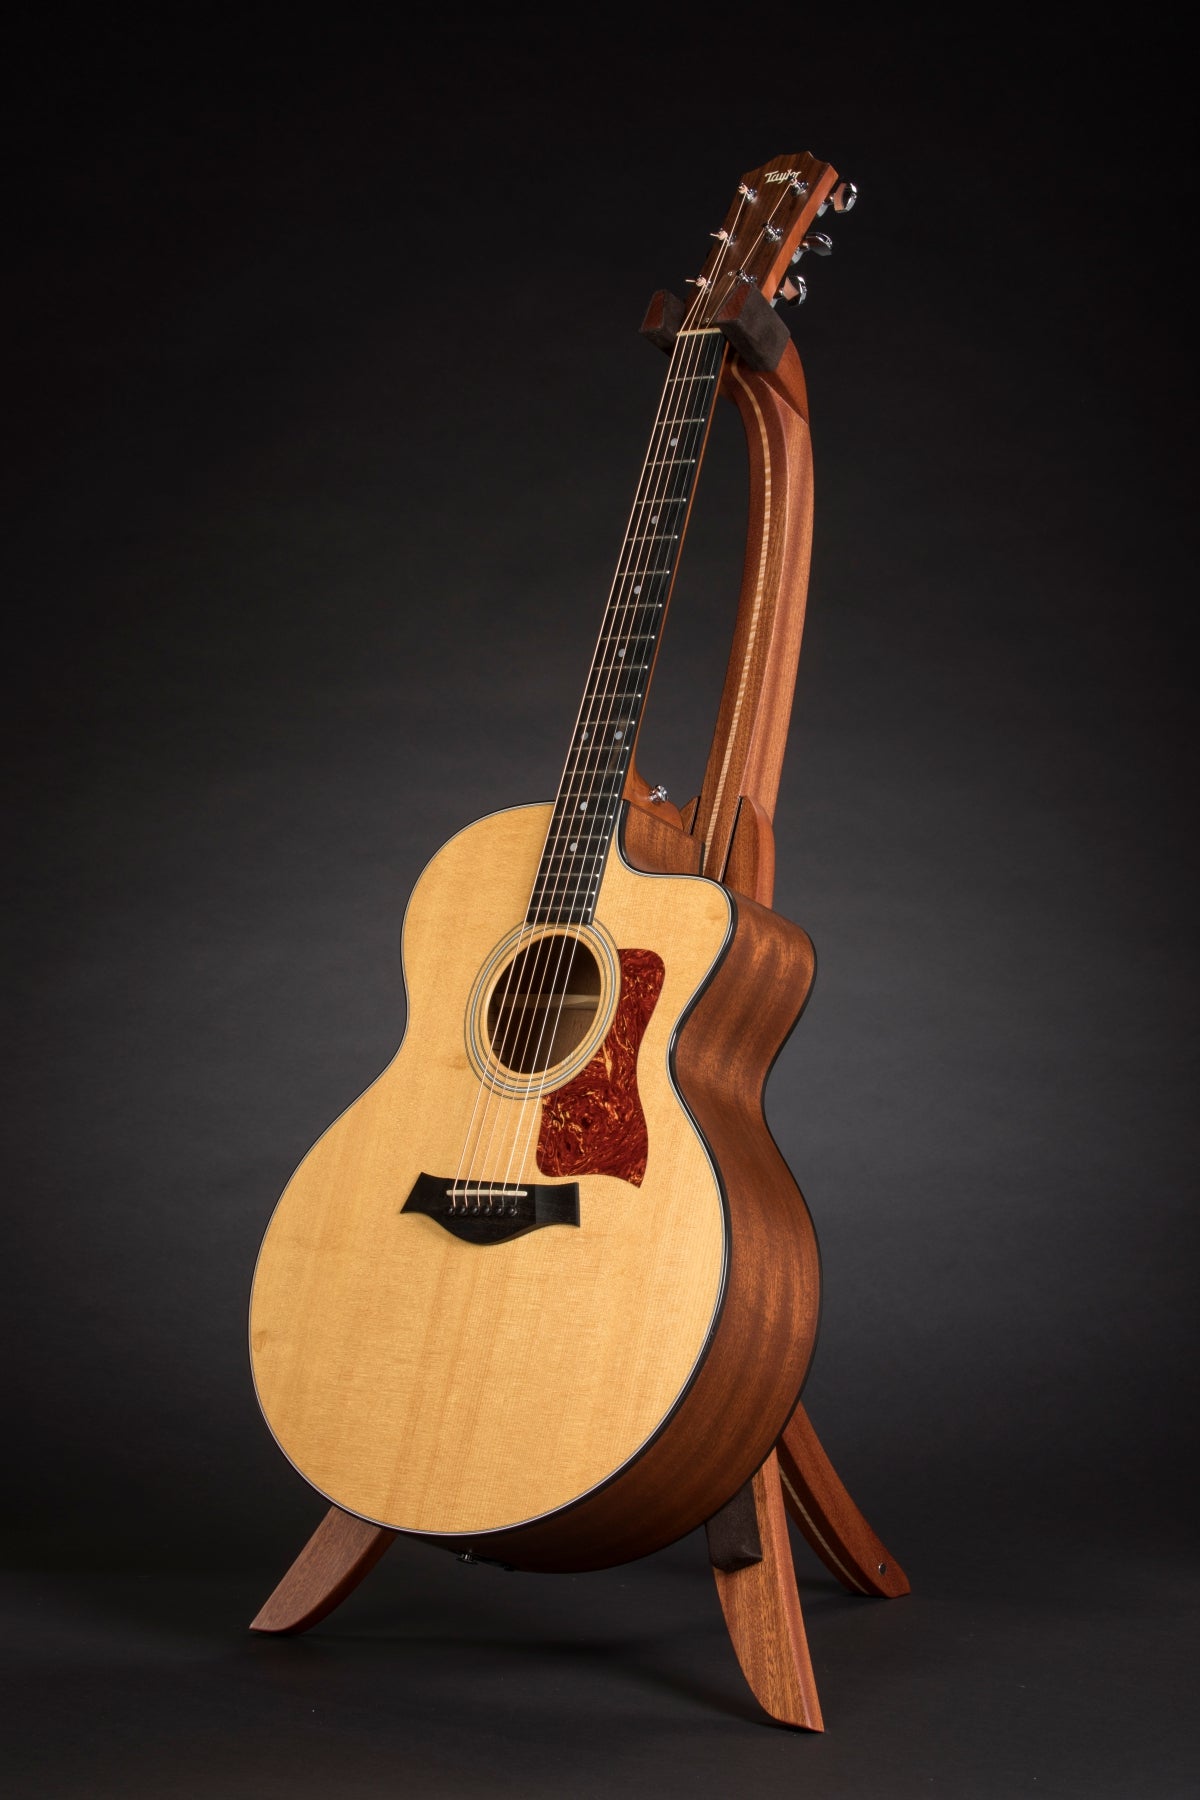 Folding sapele mahogany and curly maple wood guitar floor stand full front image with Taylor guitar